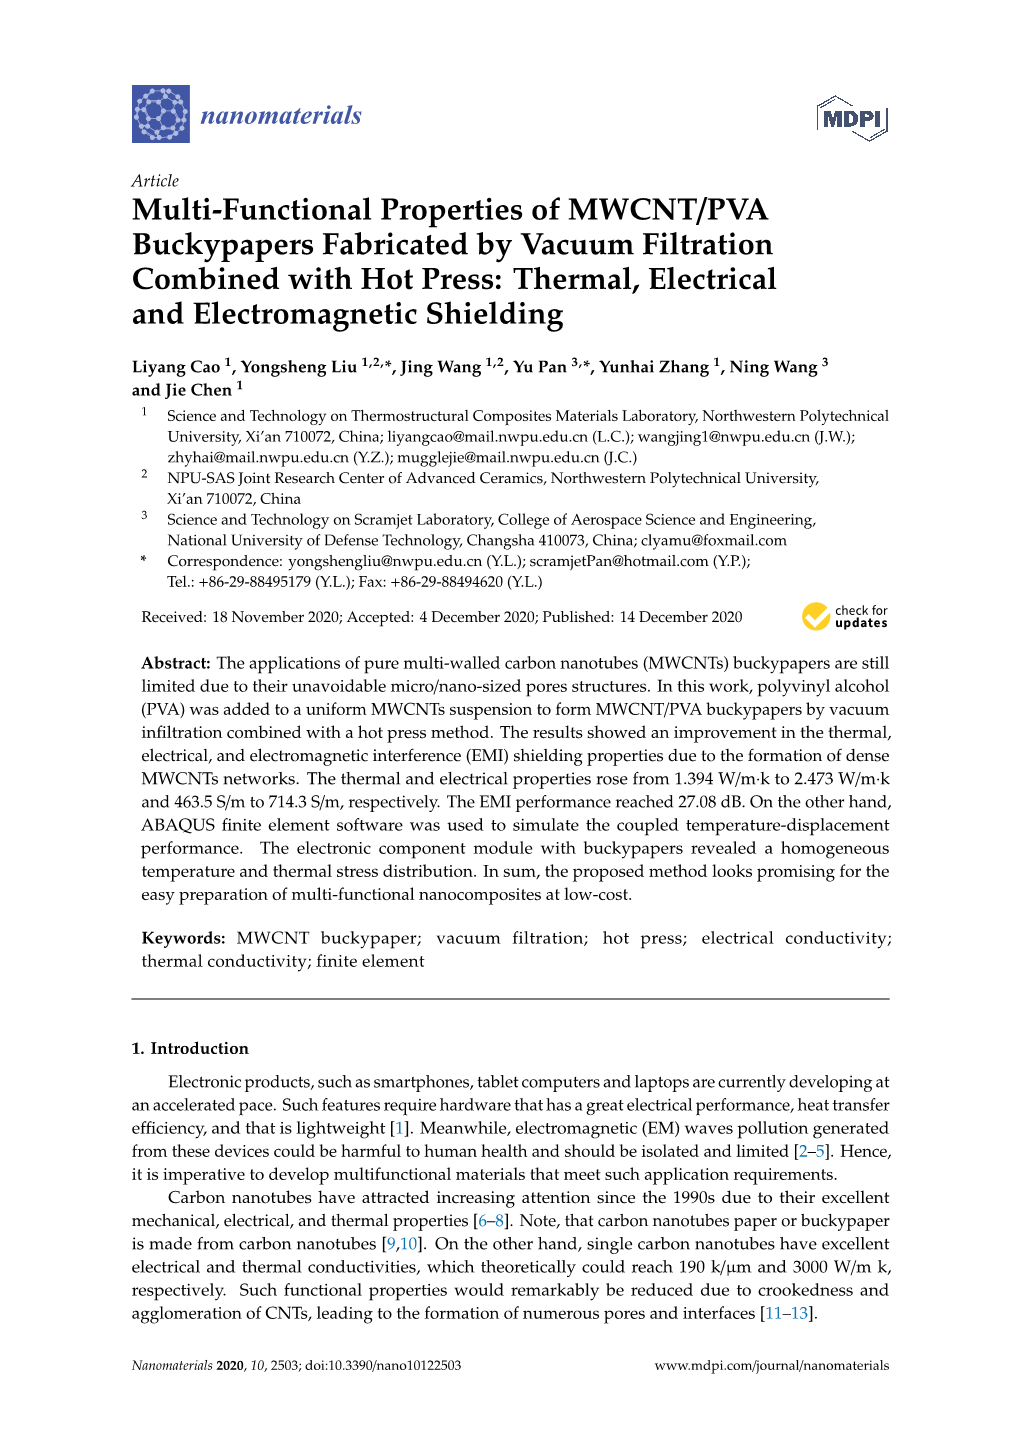 Multi-Functional Properties of MWCNT/PVA Buckypapers Fabricated by Vacuum Filtration Combined with Hot Press: Thermal, Electrical and Electromagnetic Shielding